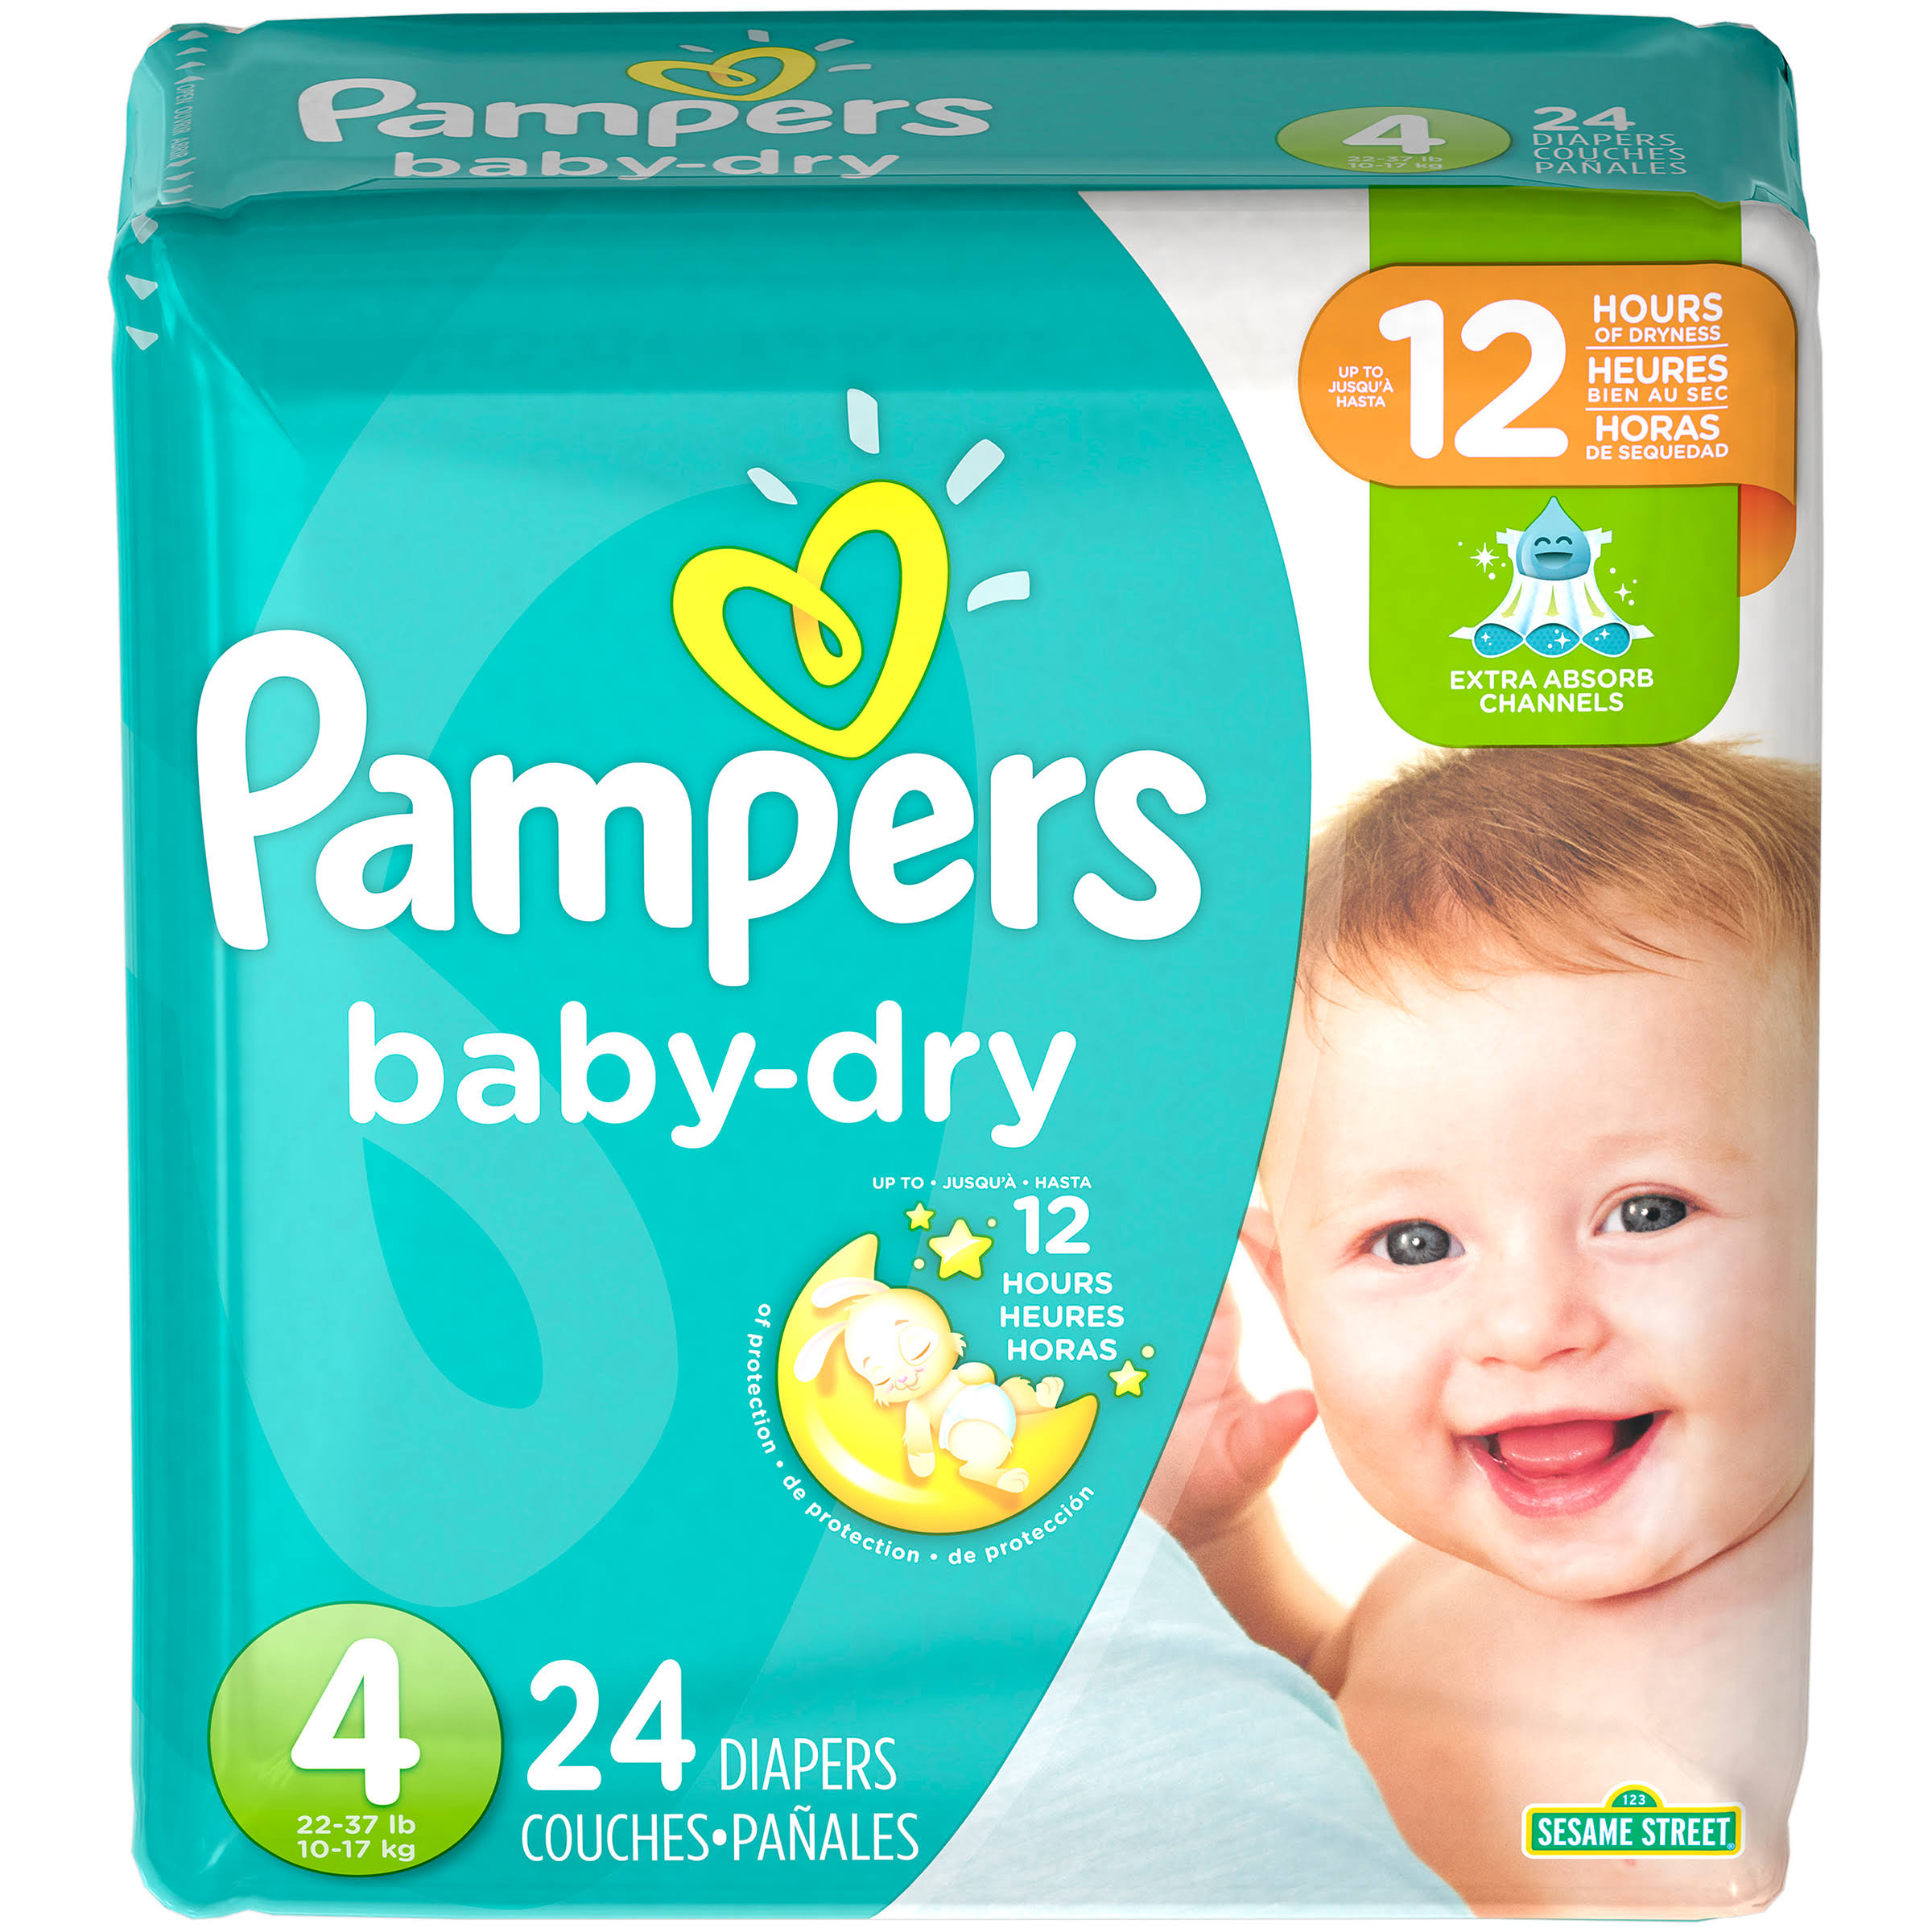 Pampers Baby Dry Flex Stage 4 Diapers - 24ct